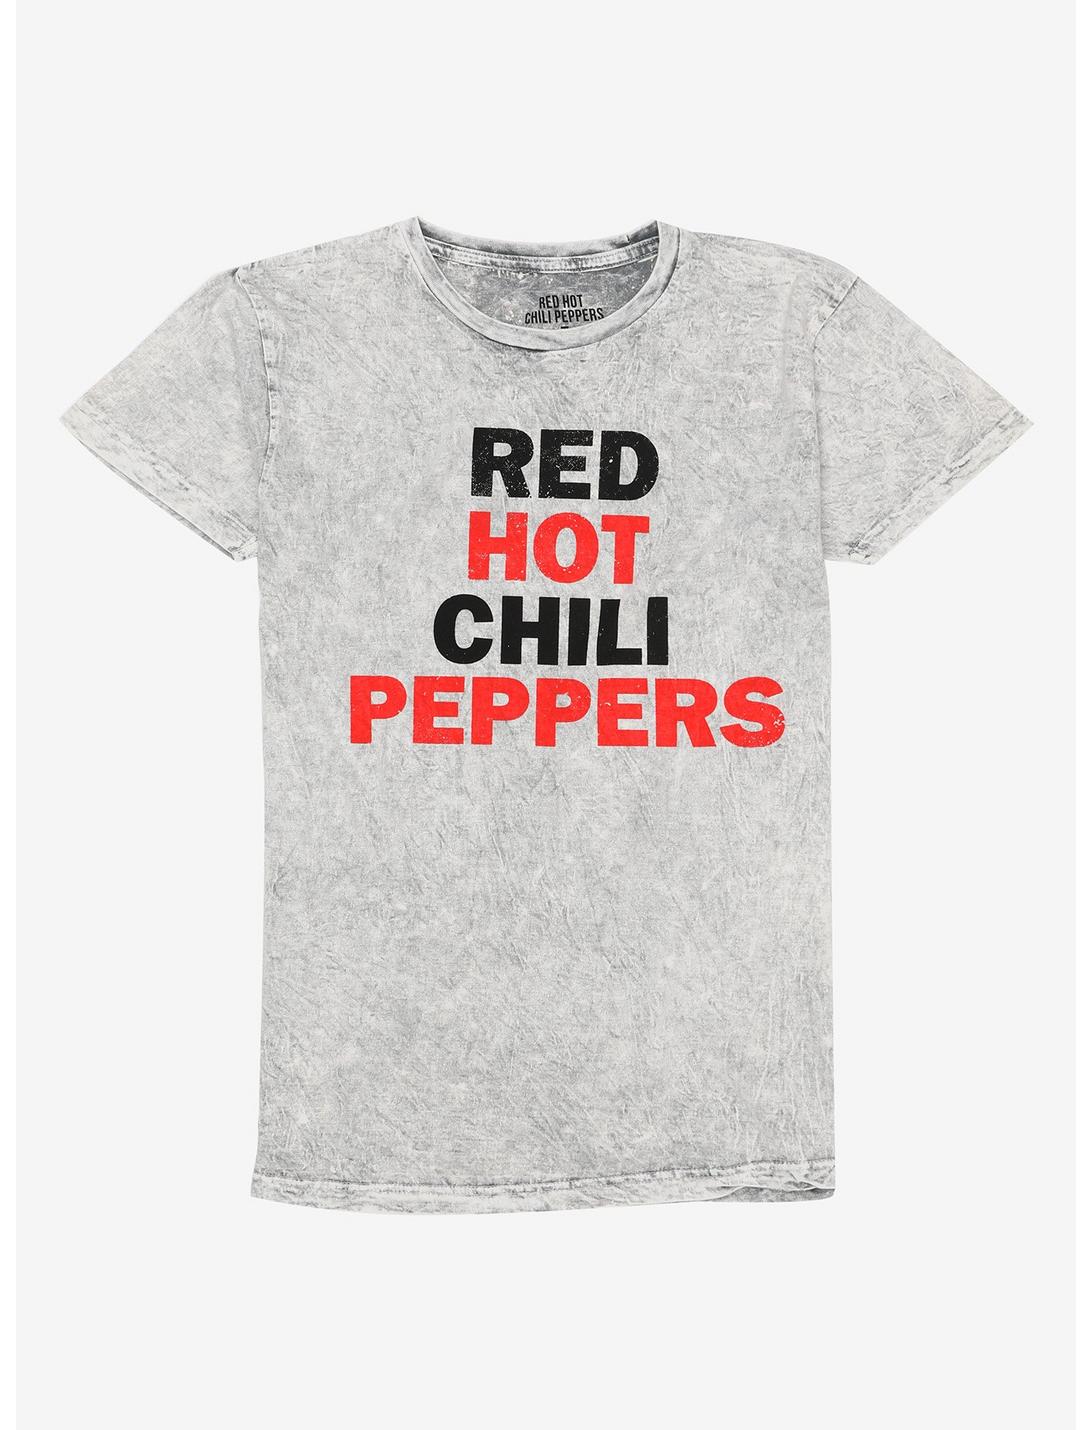 Red Hot Chili Peppers Tie-Dye T-Shirt, MULTI, hi-res